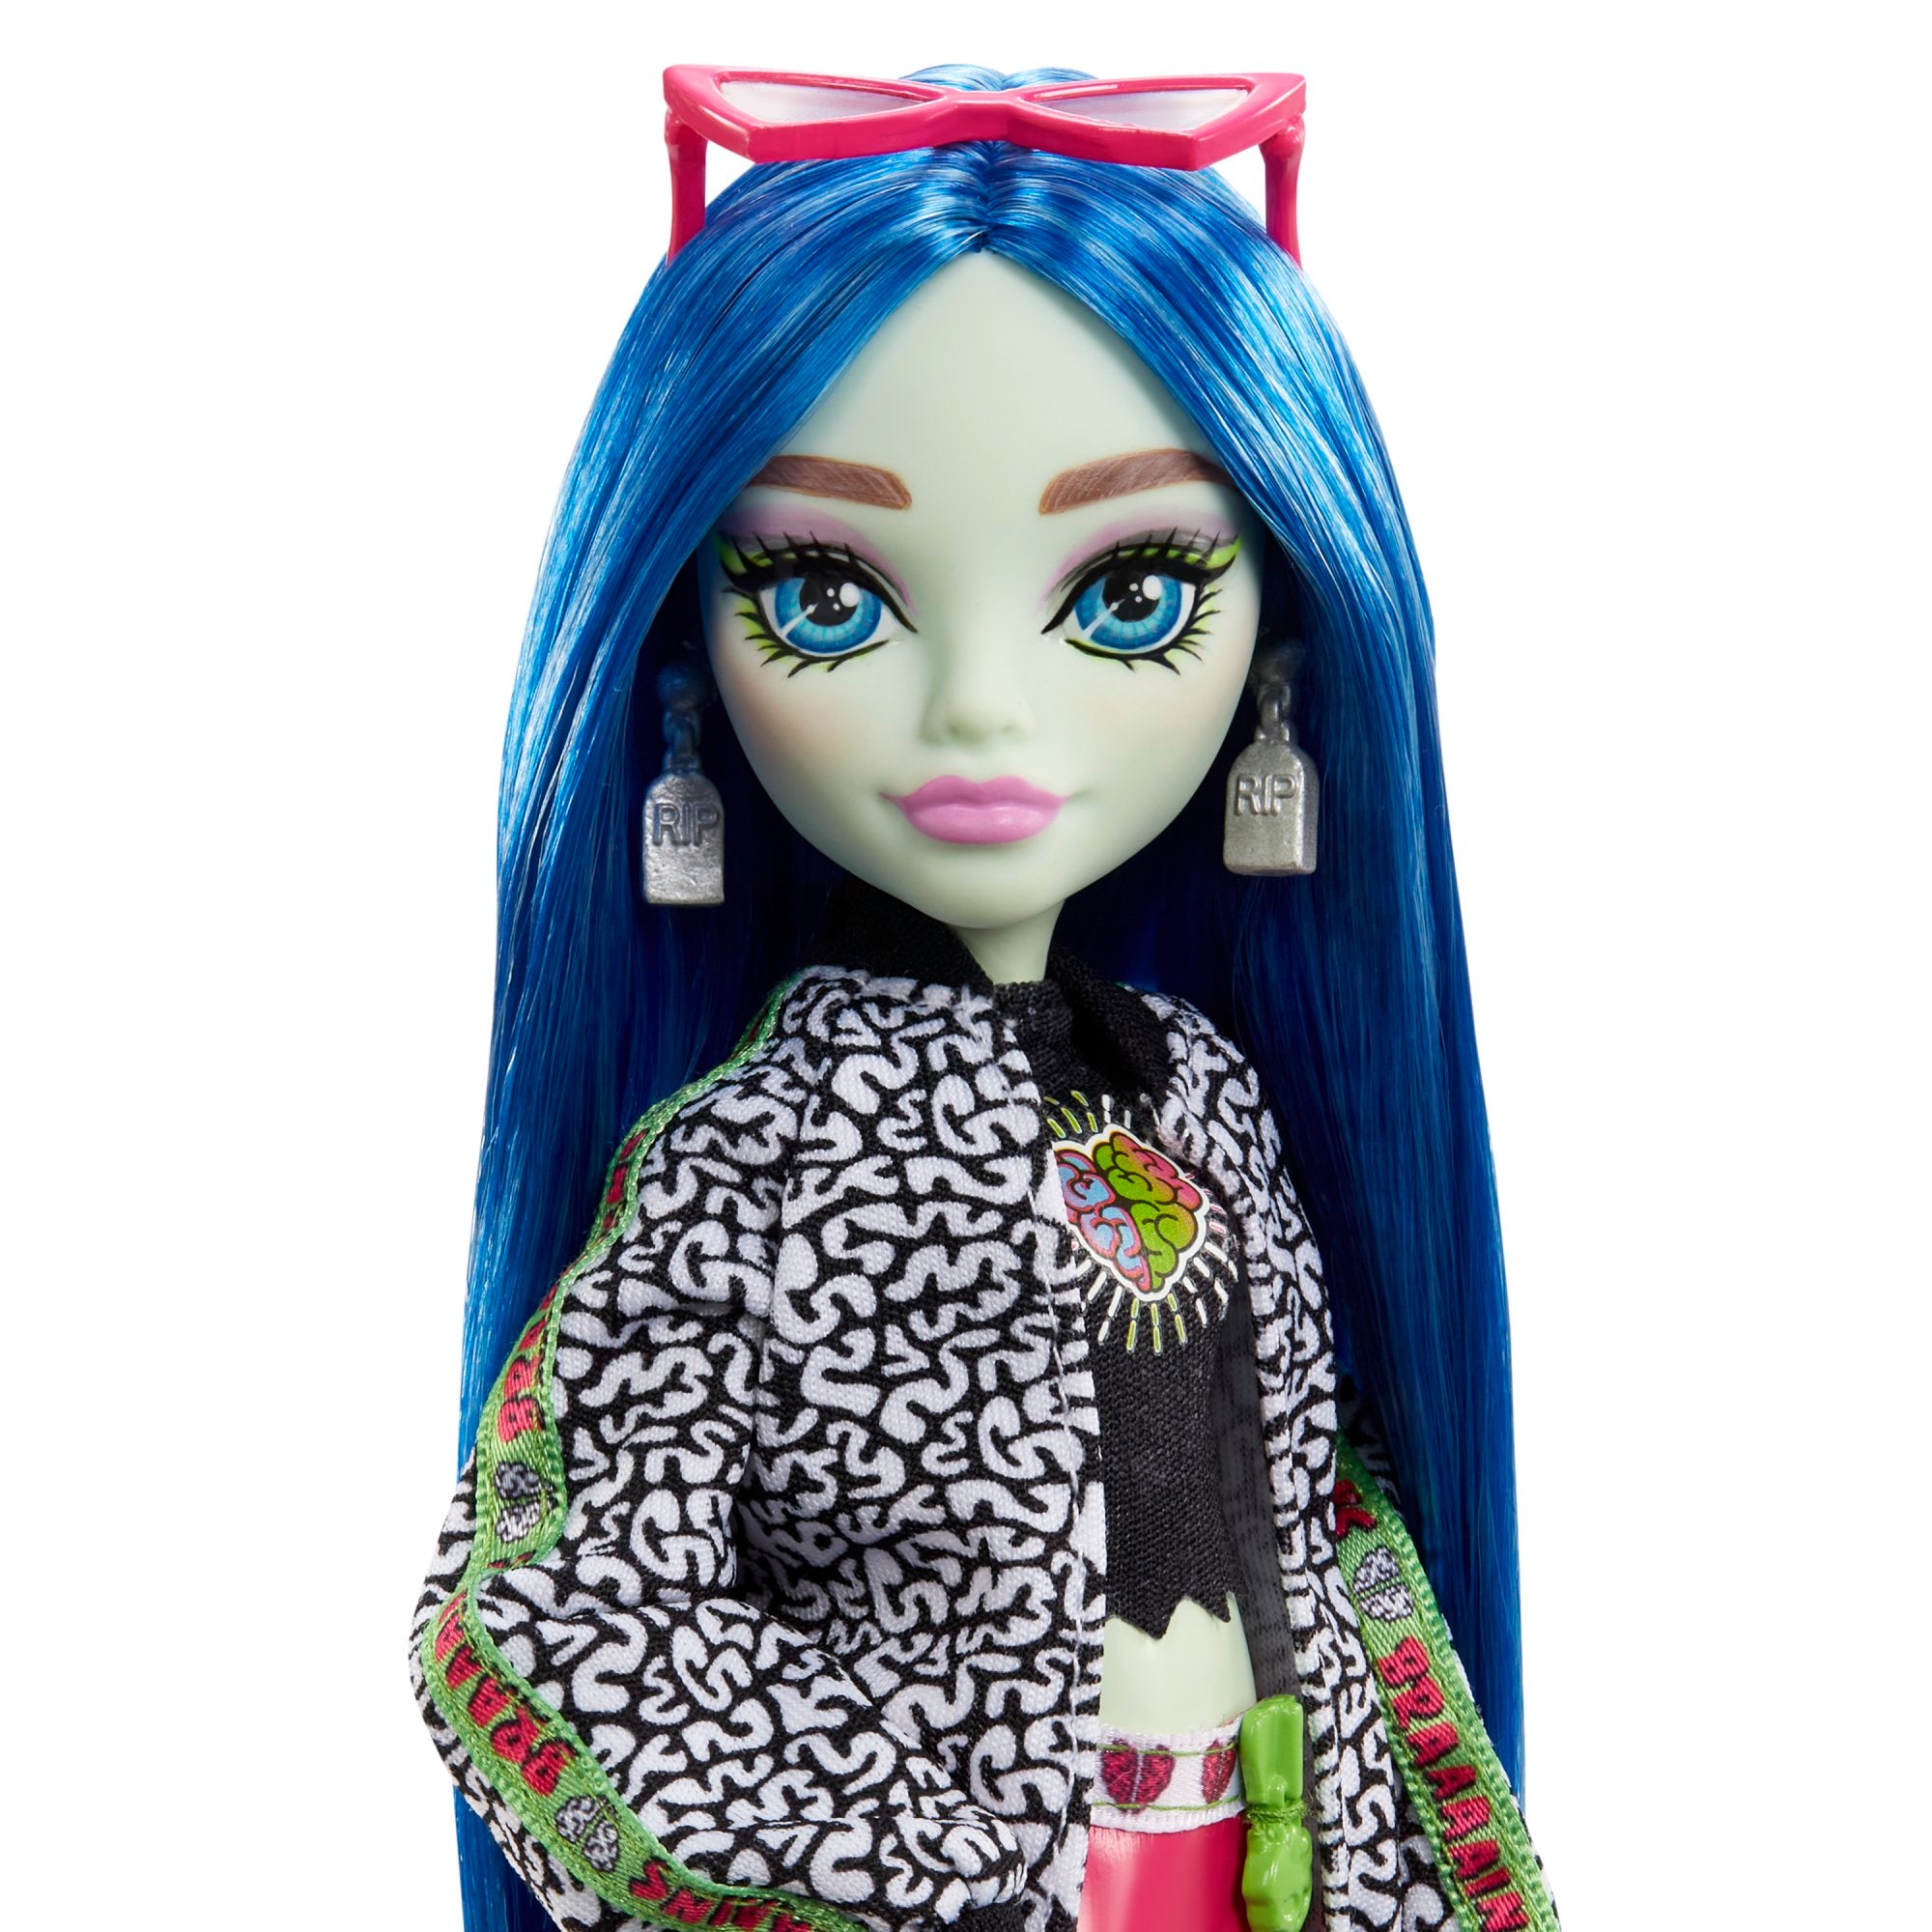 Mattel Monster High Collector Ghouluxe Ghoulia Doll.